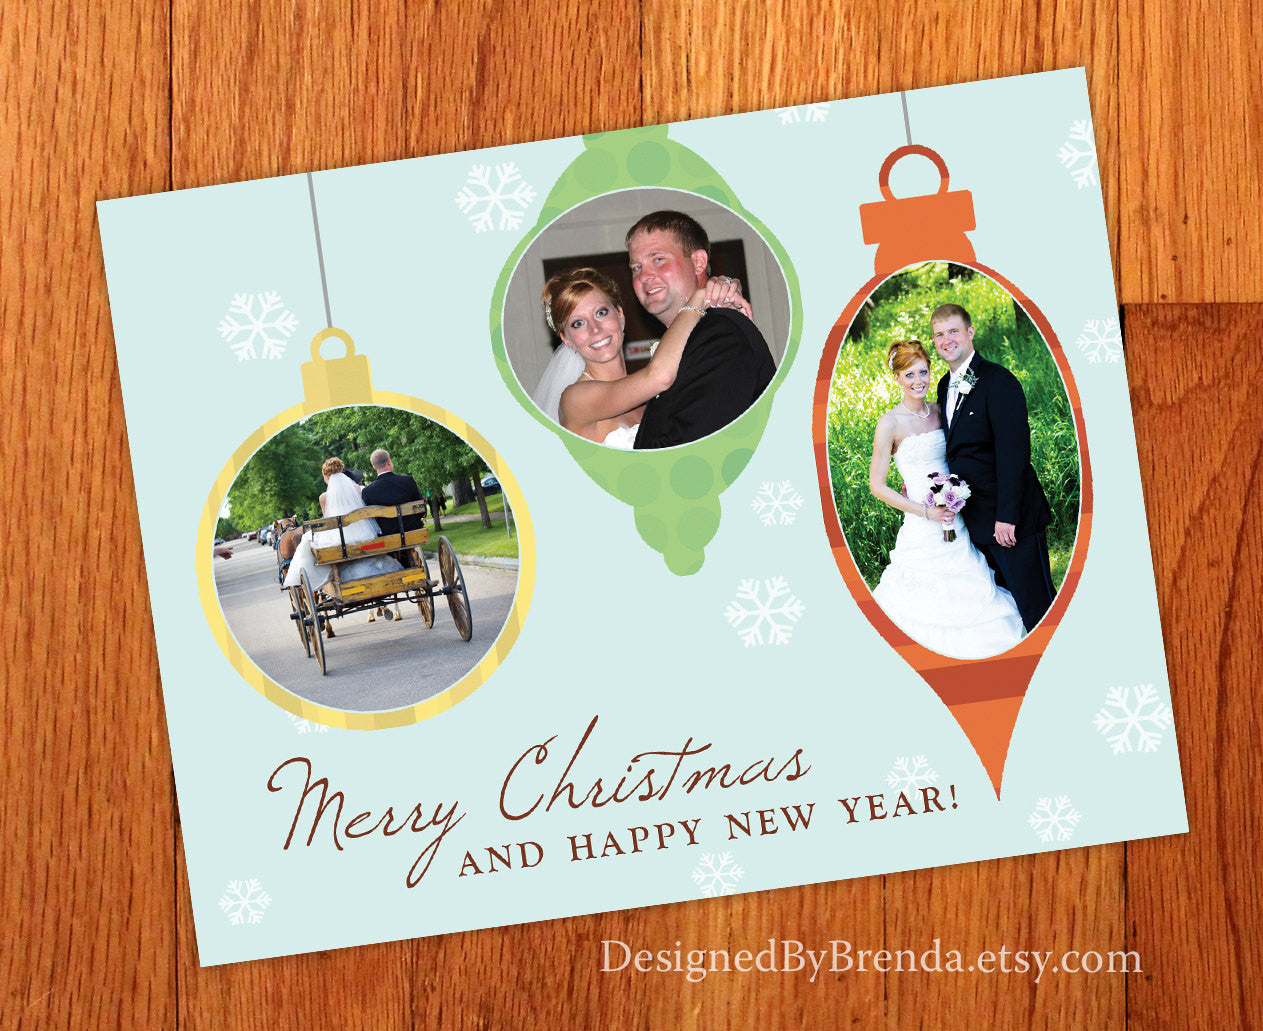 Whimsical Christmas Ornament Card with 3 Photos - Any Colors & Any Holiday Greeting